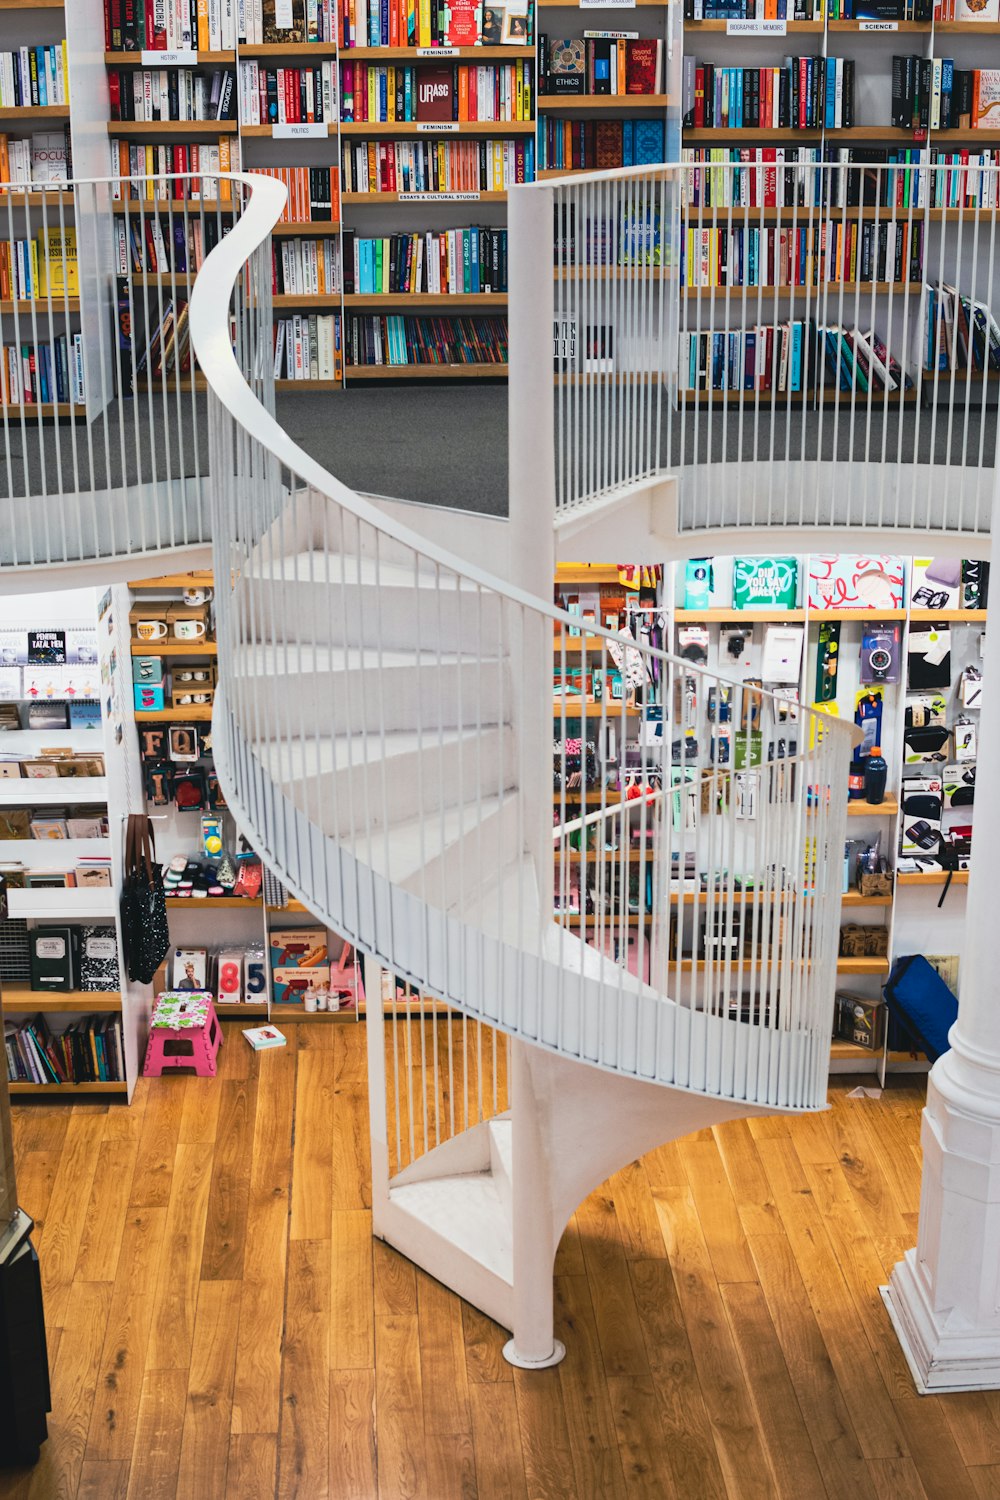 white spiral staircase inside building